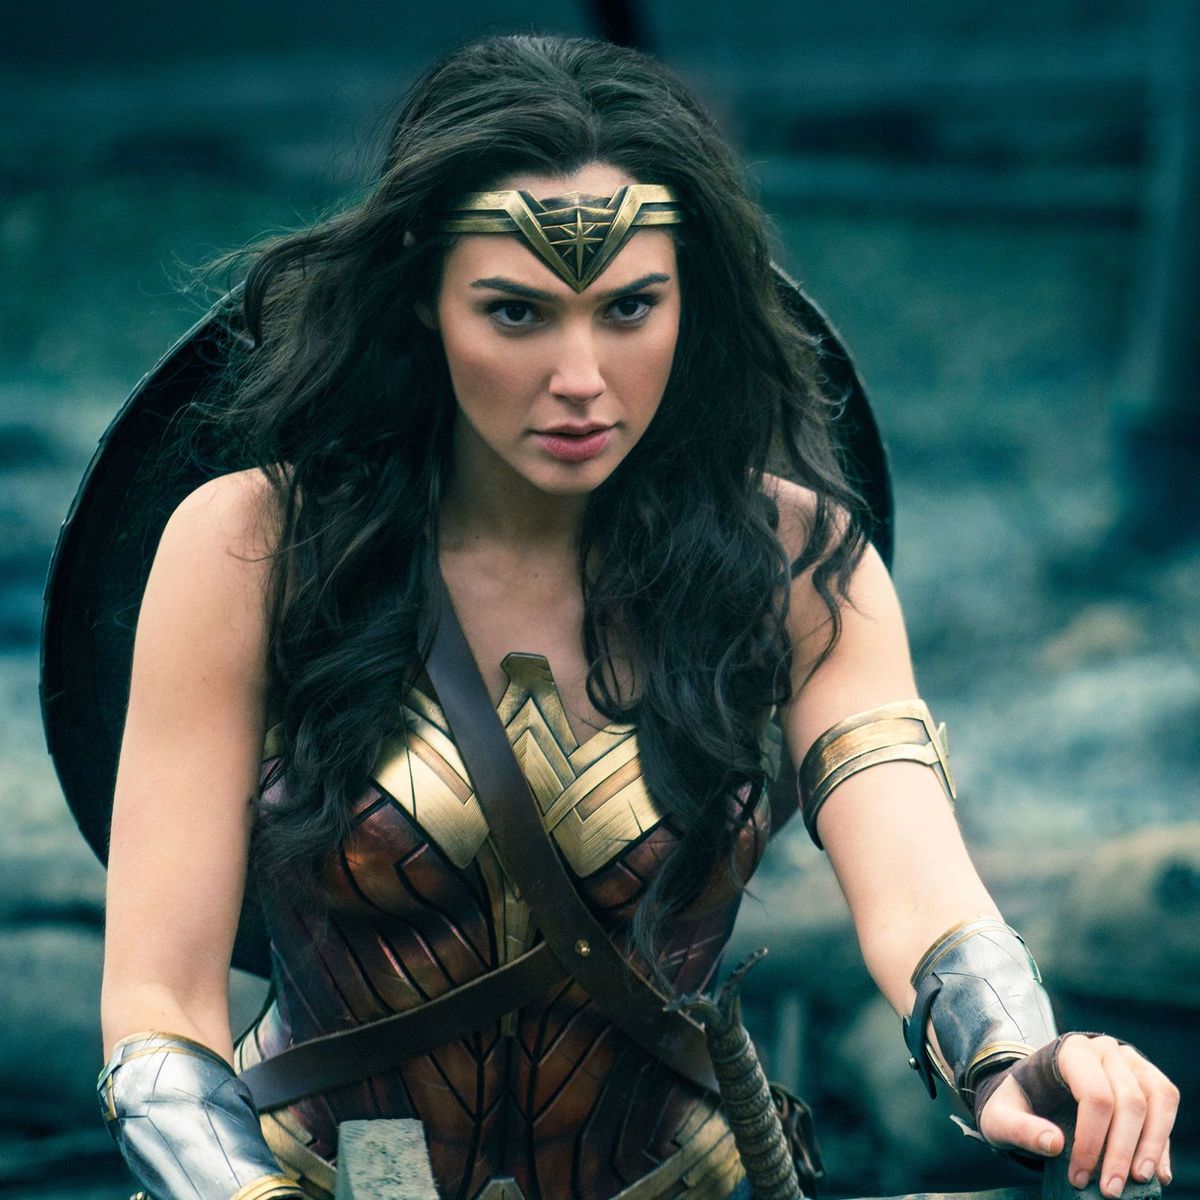 Femininity and Feminism in 'Wonder Woman' - MOVIE REVIEW | Marie Claire